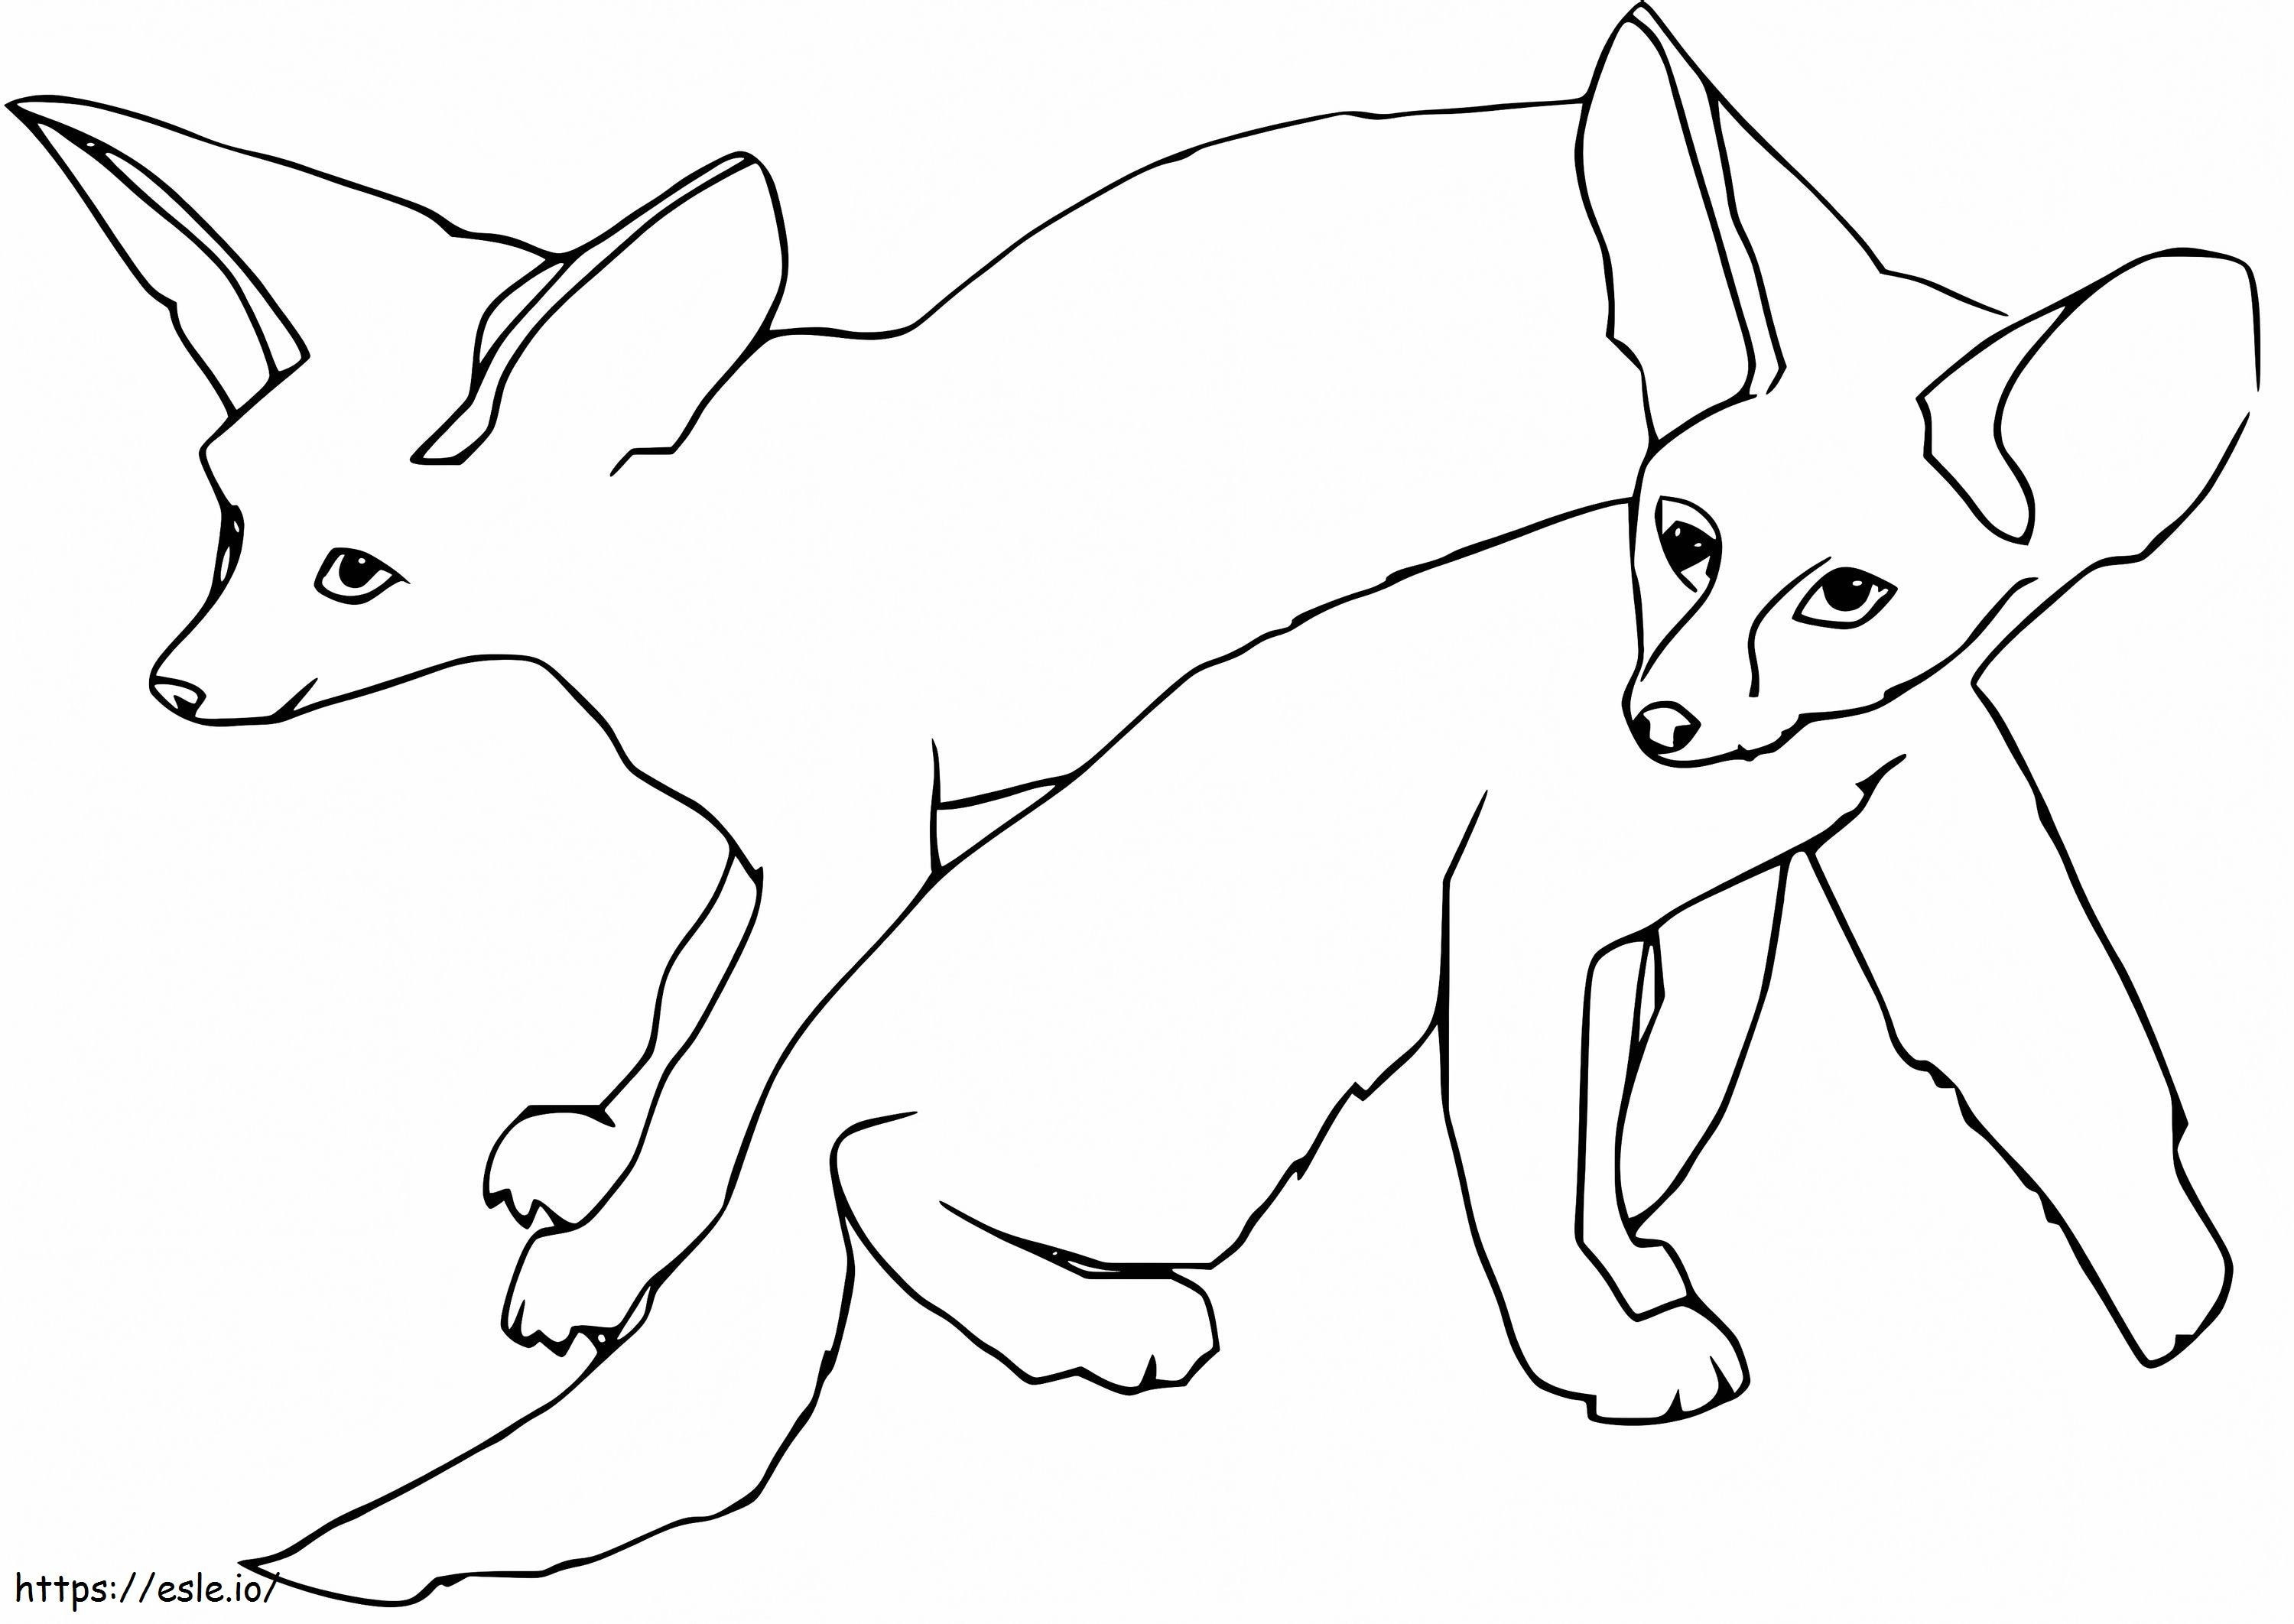 Two Fennec Foxes coloring page